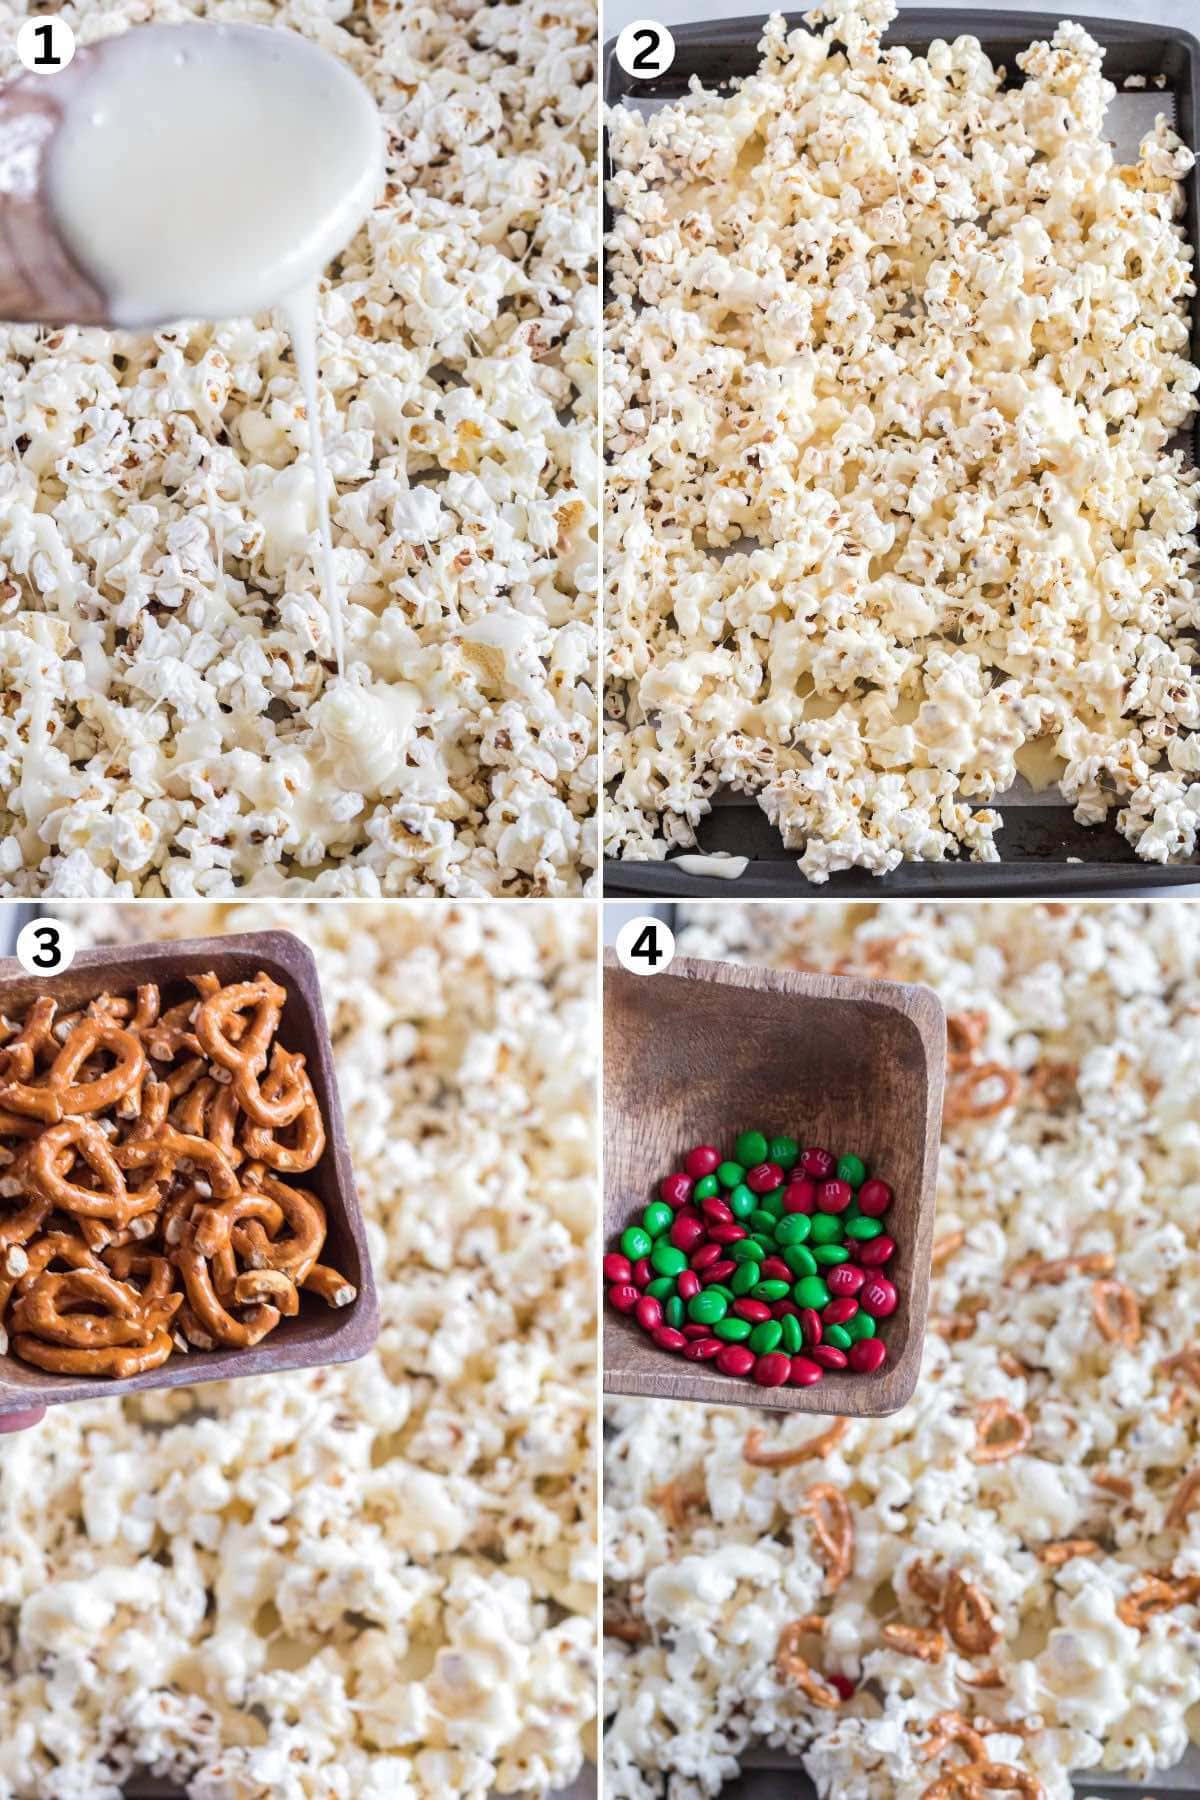 pour the melted marshmallow into the popcorn. add pretzels and m&ms.